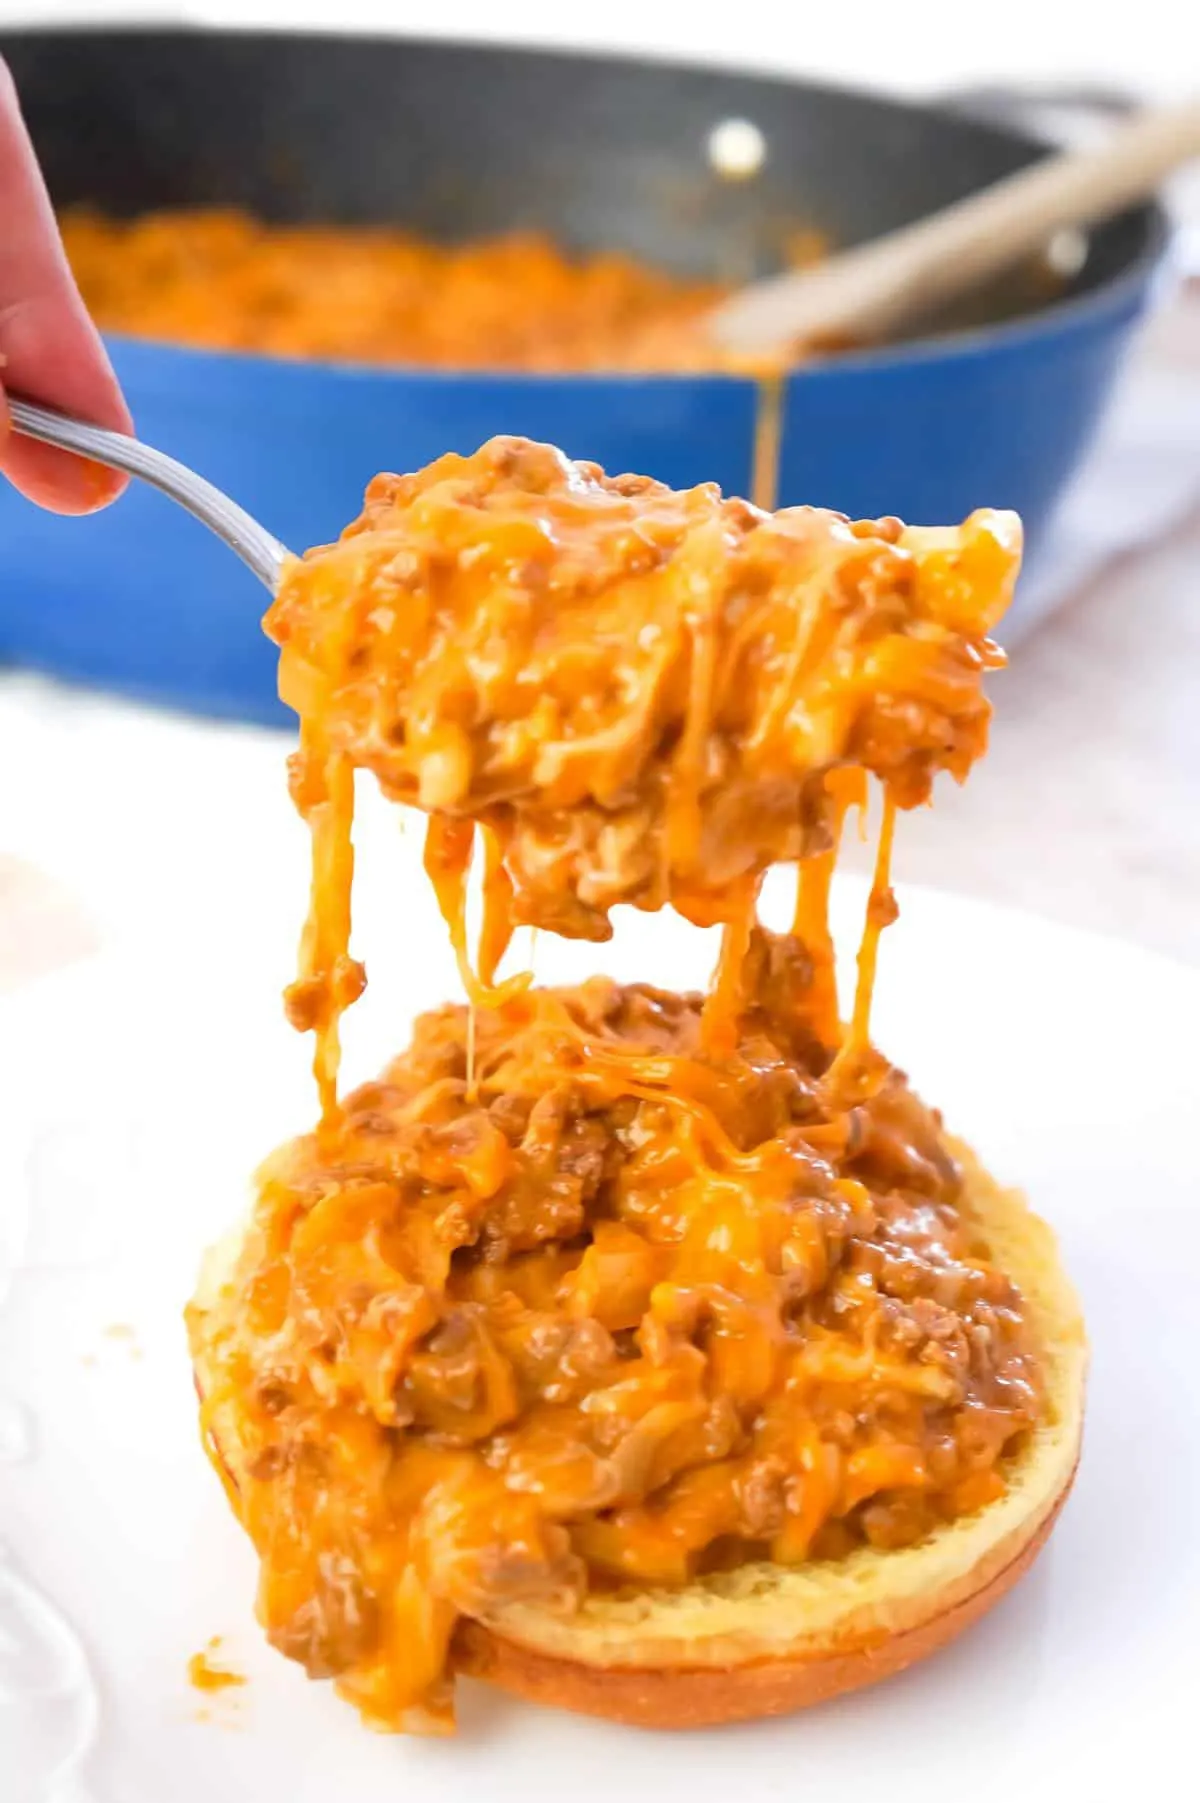 Cheesy Sloppy Joes are an easy weeknight dinner recipe using ground beef tossed in sloppy joe sauce, condensed cheddar cheese soup and shredded mozzarella and cheddar cheese all piled on to toasted brioche buns.